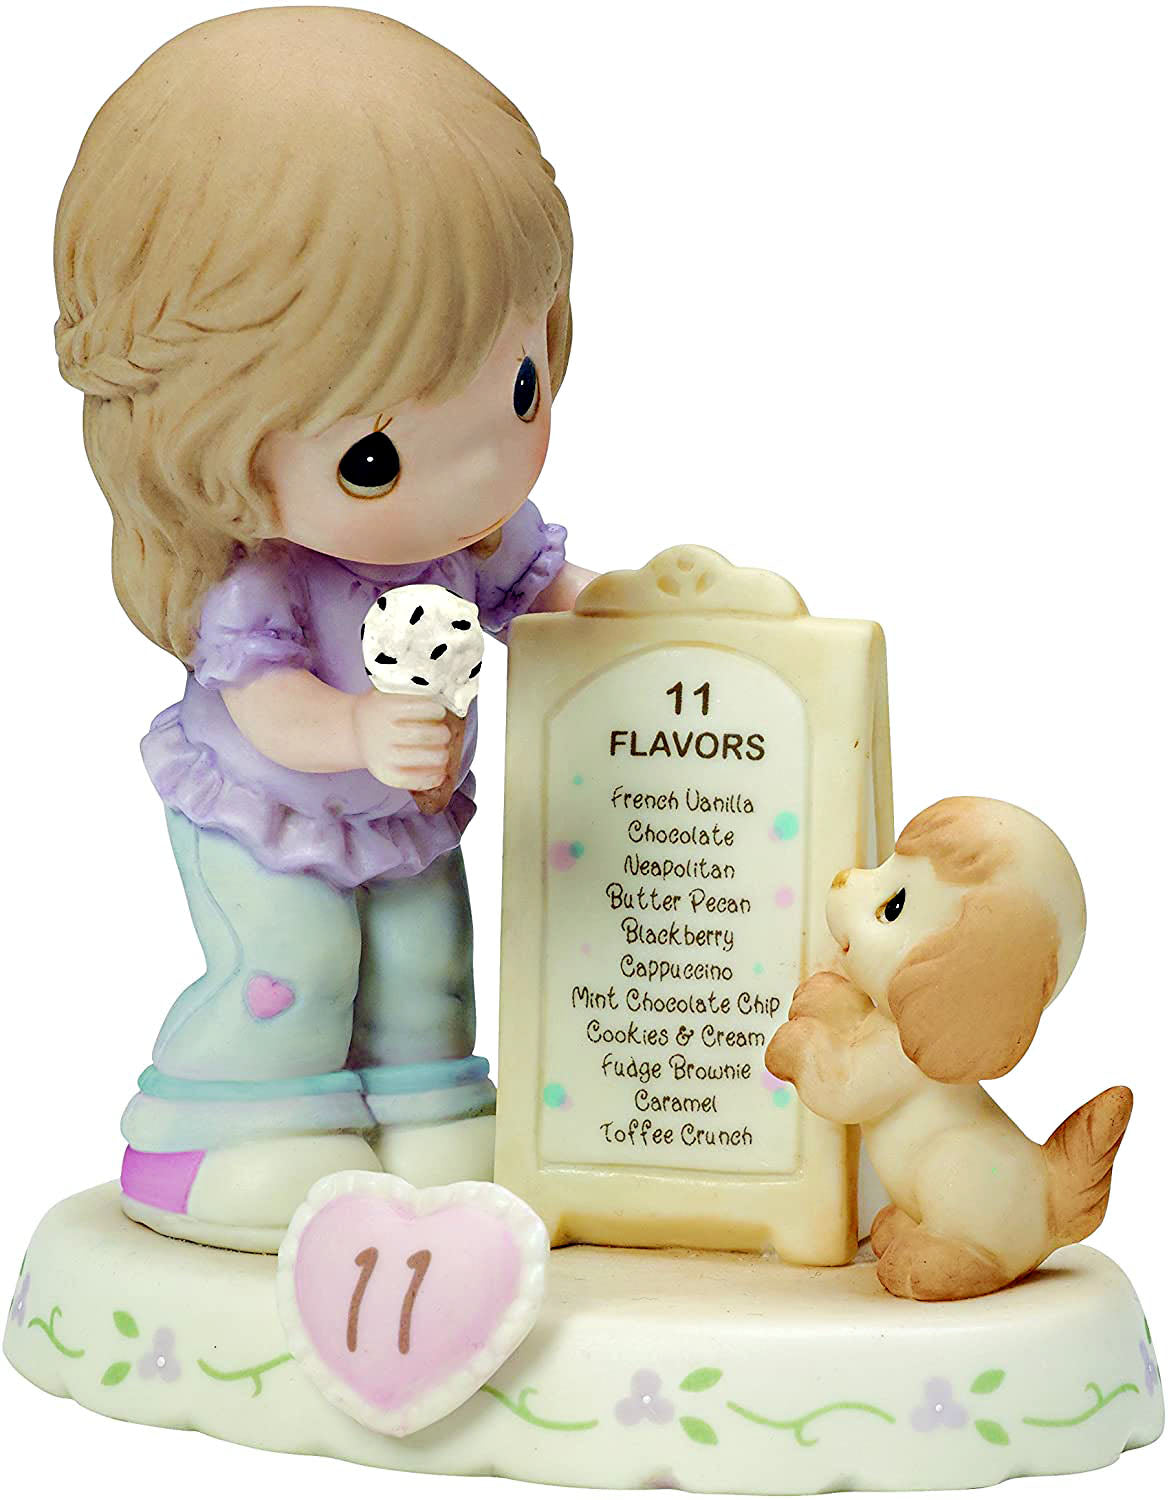 Precious Moments Age 11 Girl Birthday Gifts, Growing in Grace, Porcelain Figurine - Royal Gift